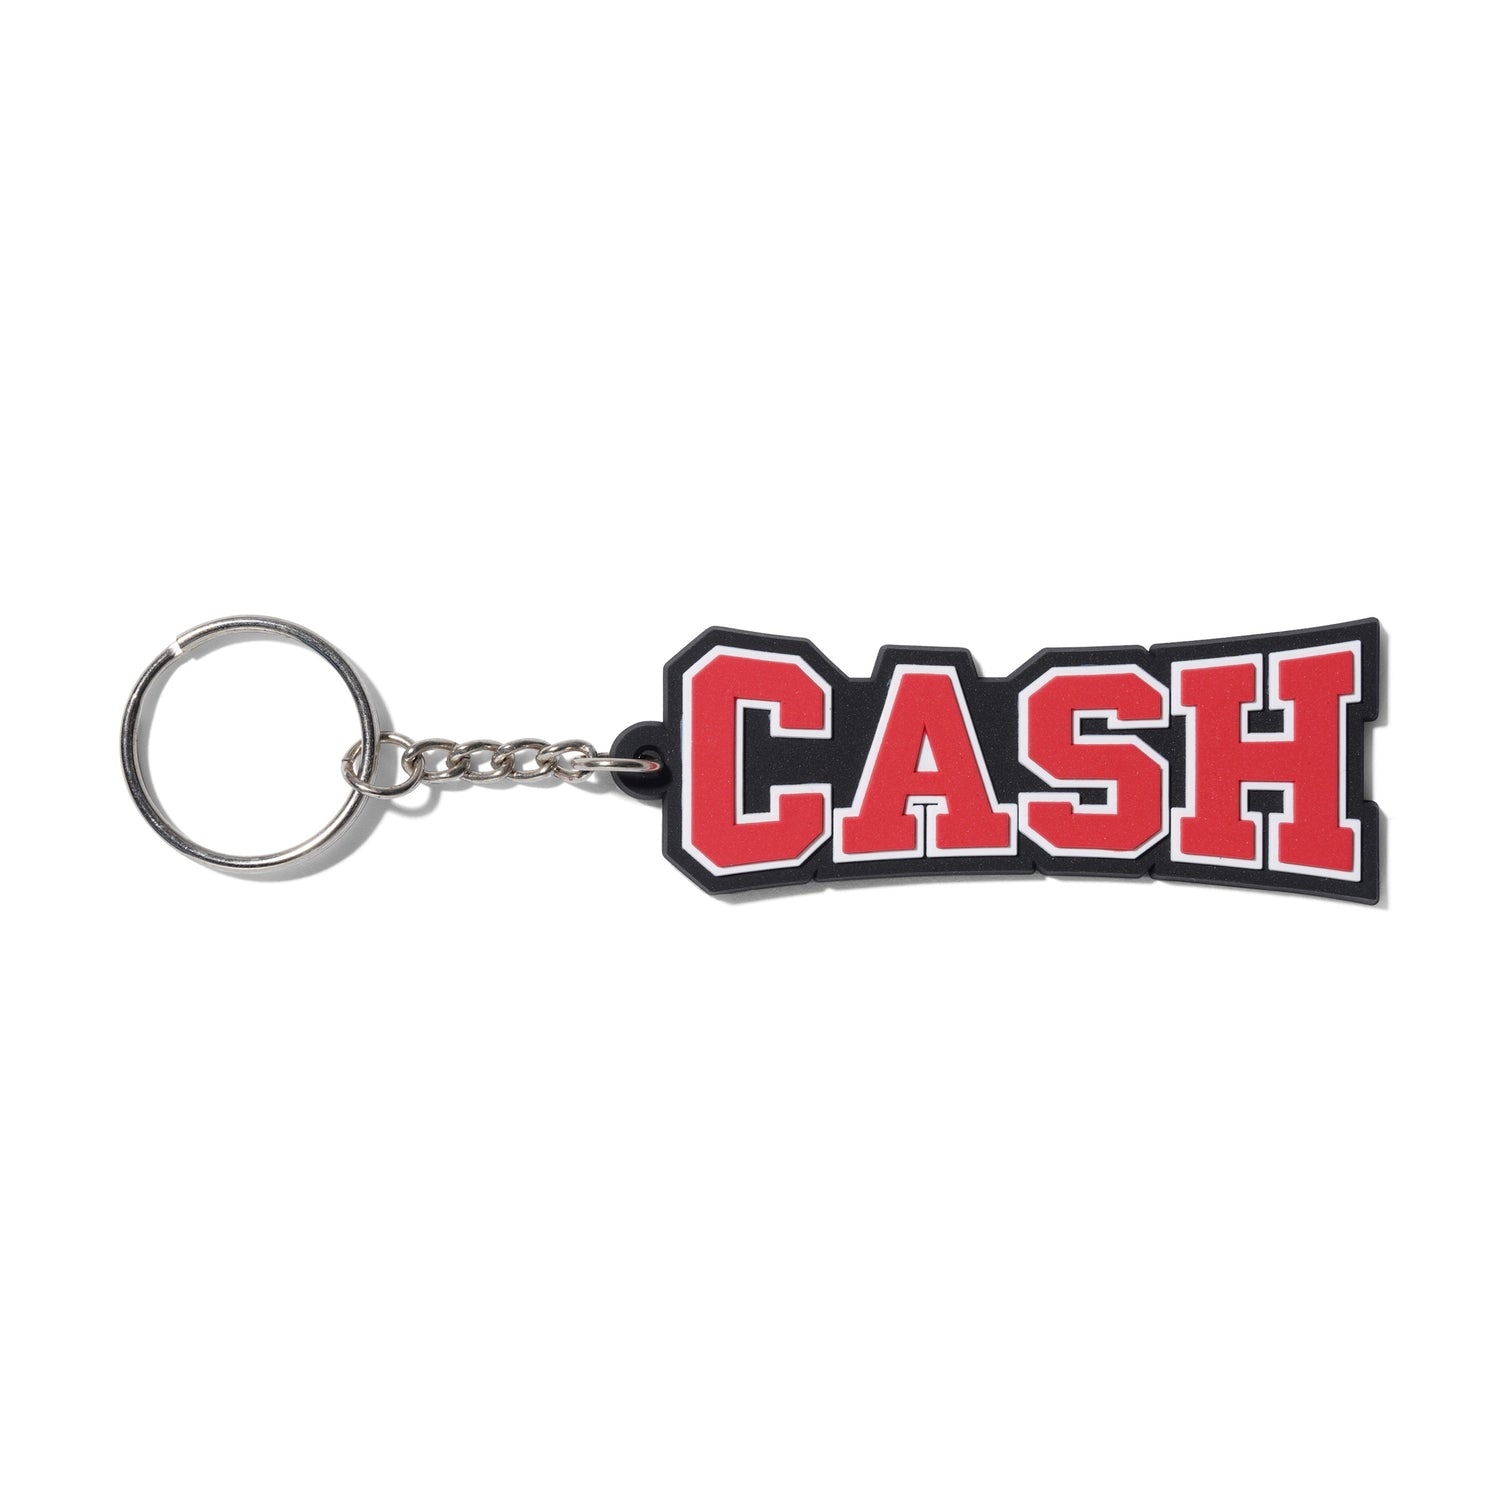 Campus Rubber Key Chain, Black / Red